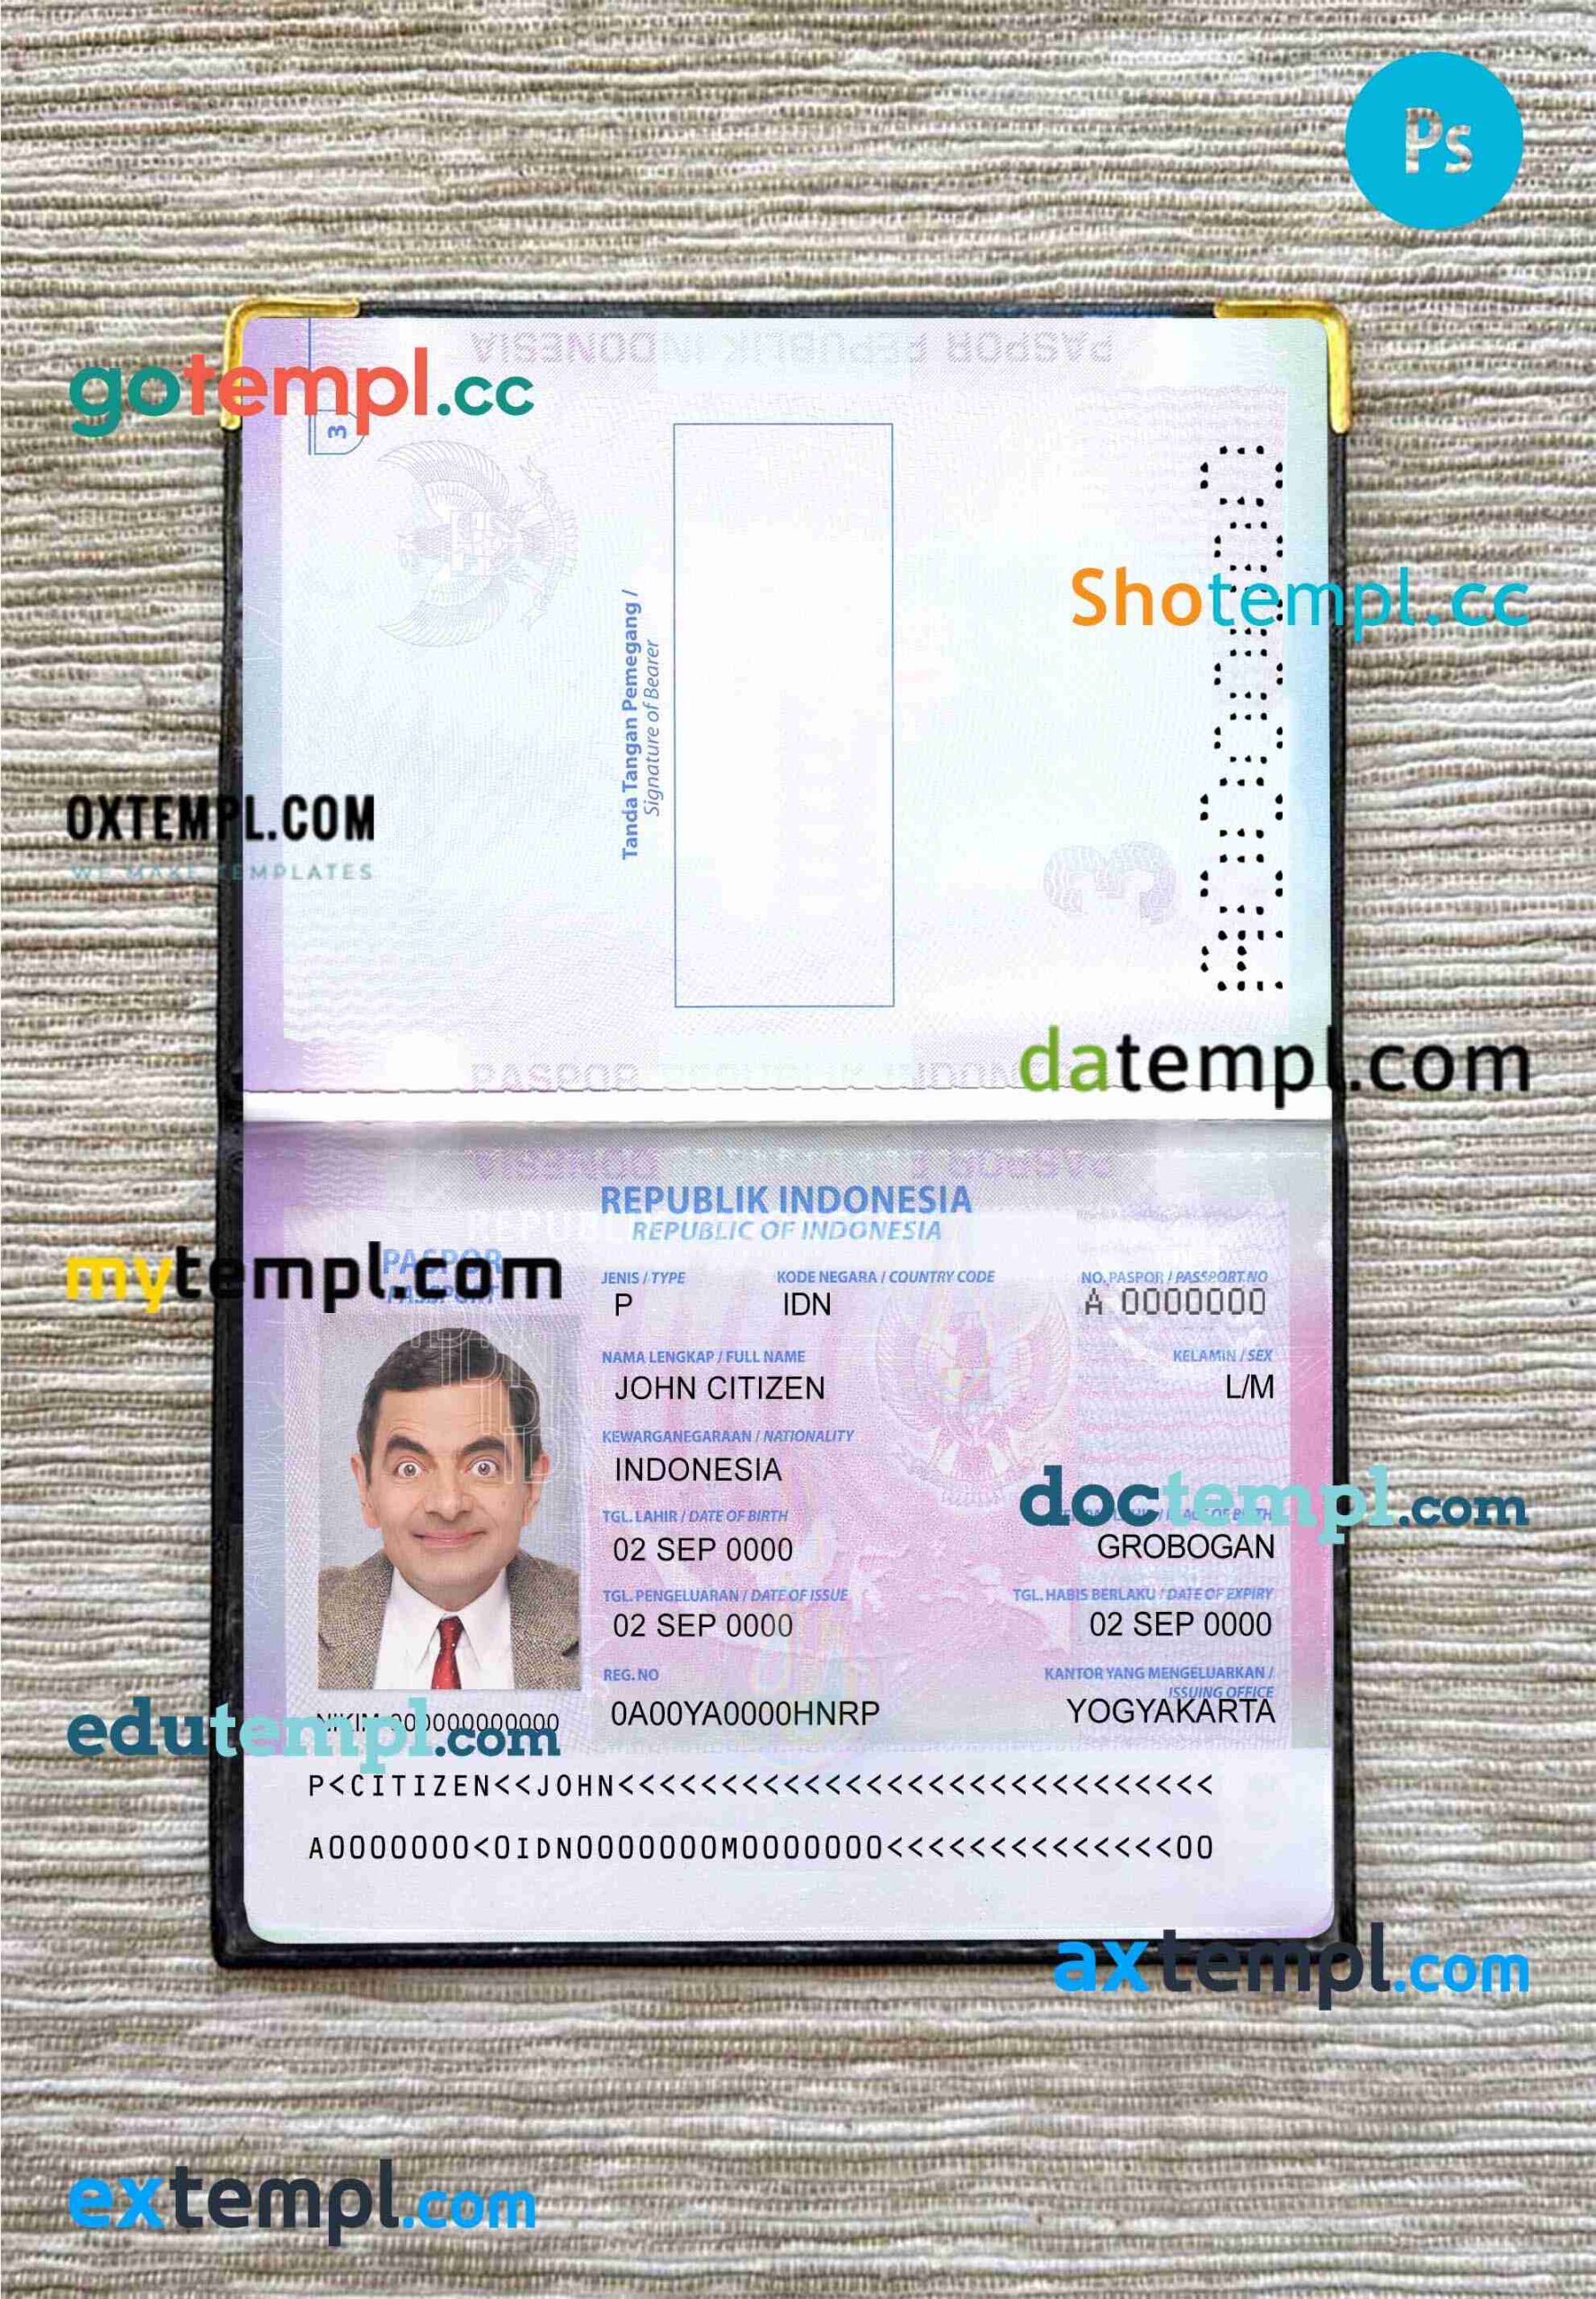 Indonesia passport PSD files, scan and photograghed image, 2 in 1